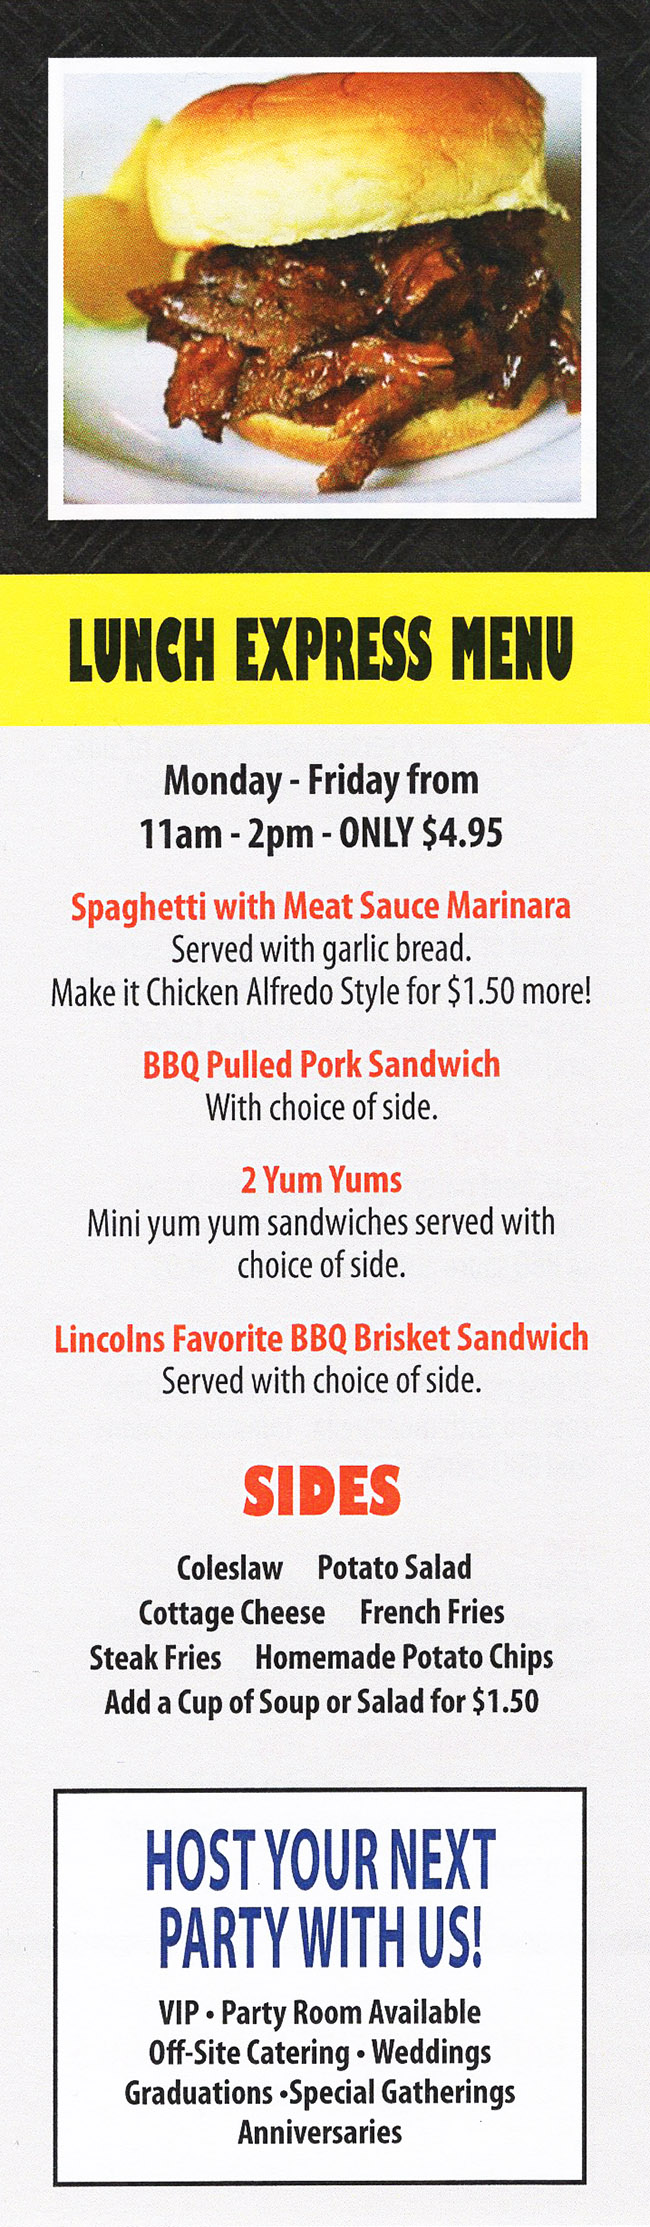 The Garage Sports Bar & Grill Delivery Menu - With Prices - Lincoln NE